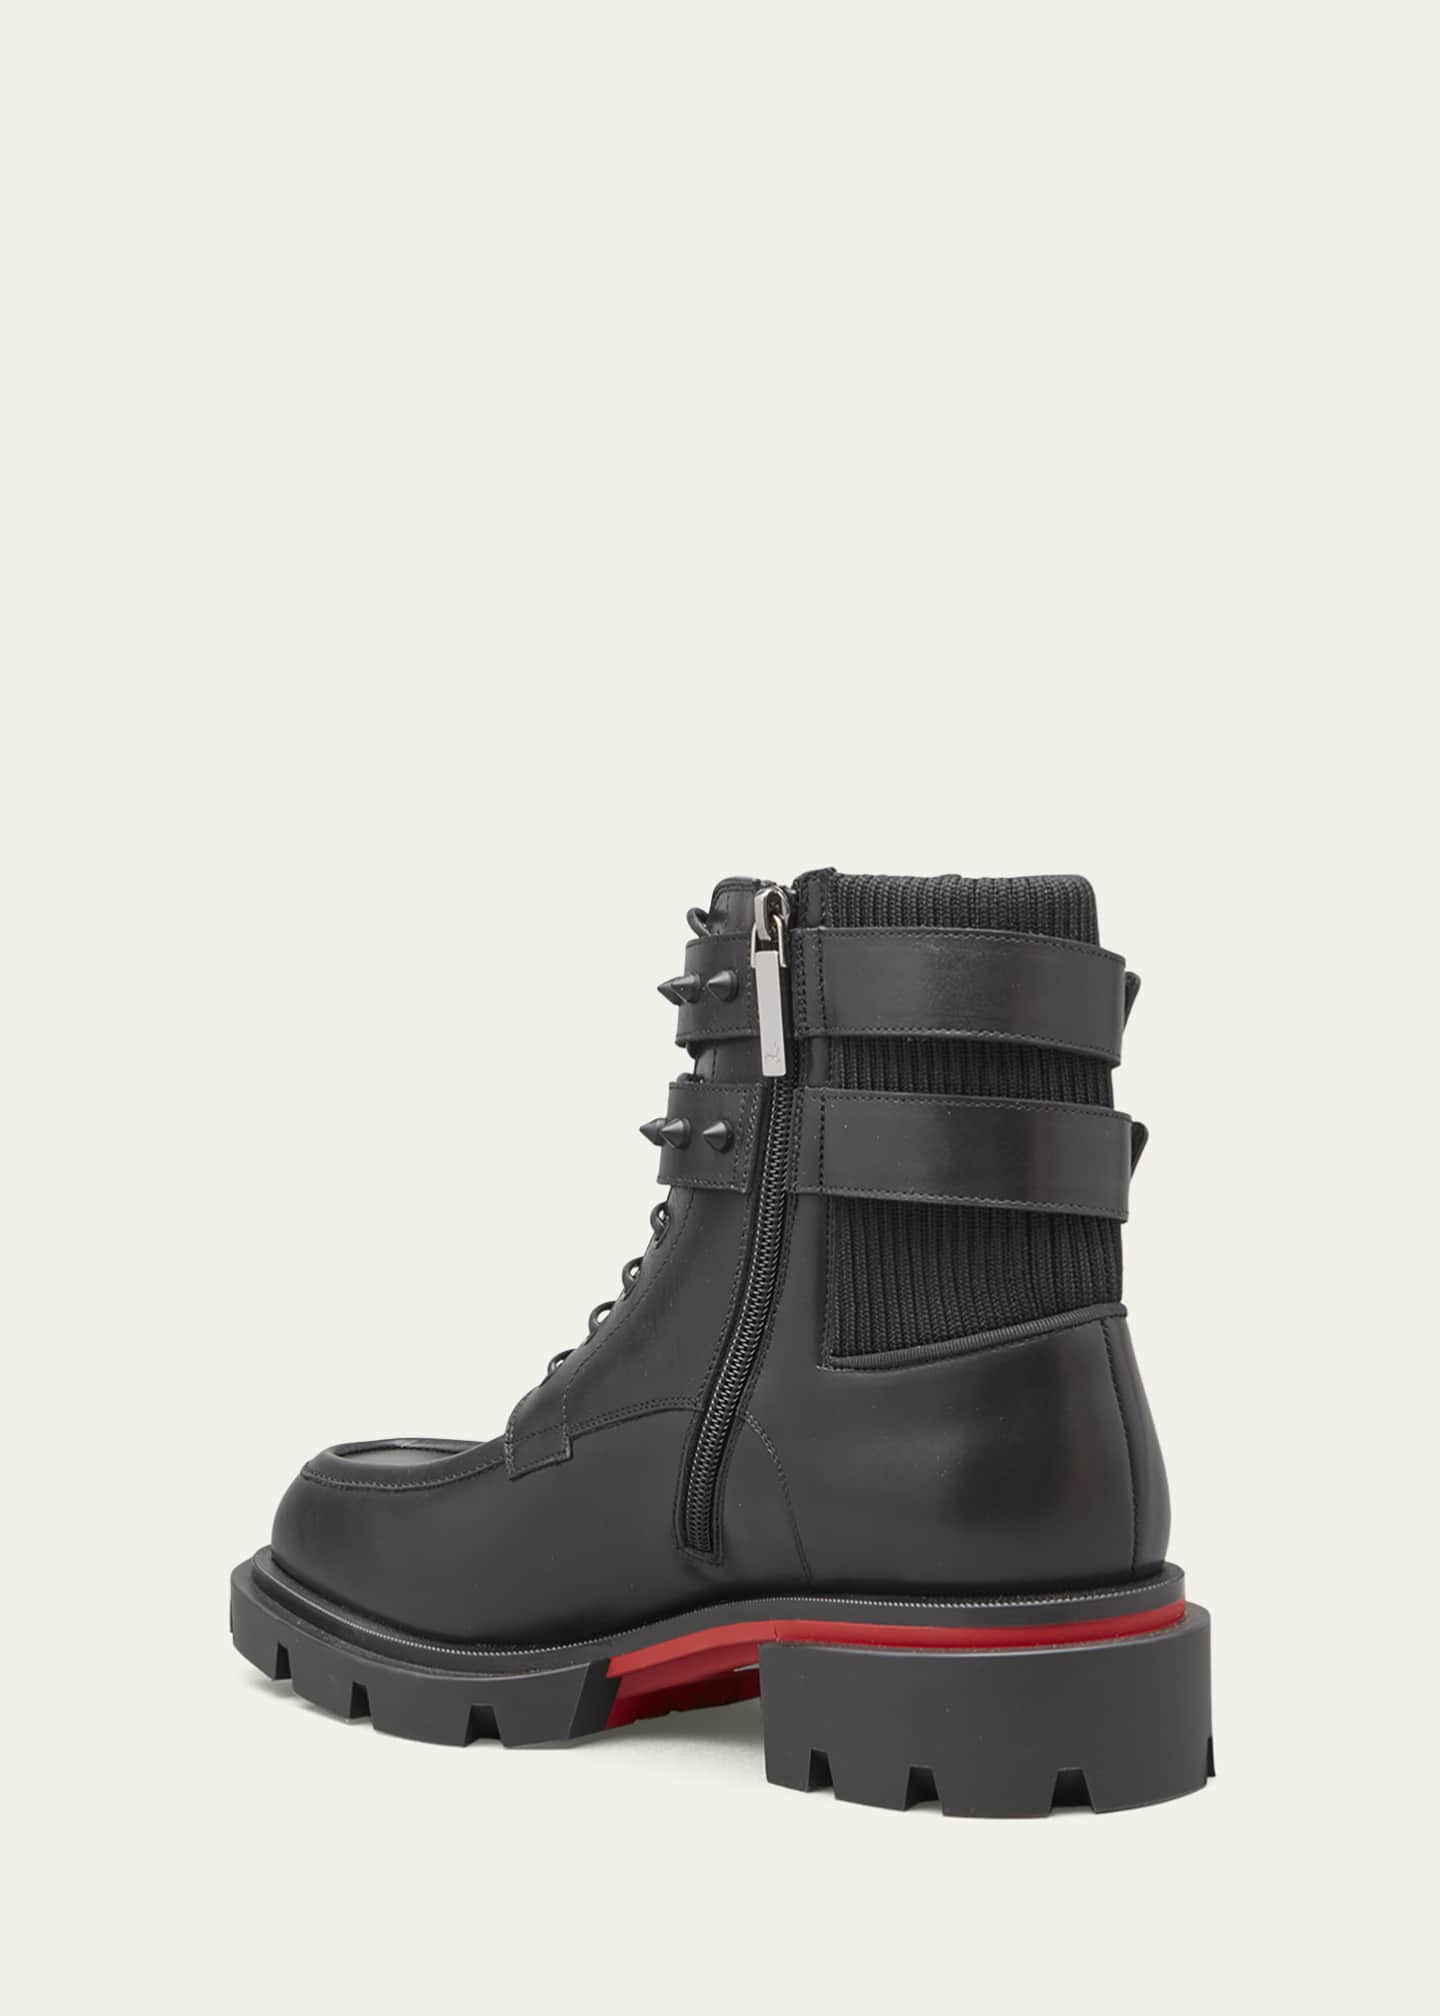 Christian Louboutin Men's Our Fight Zip Leather Combat Boots - Bergdorf ...